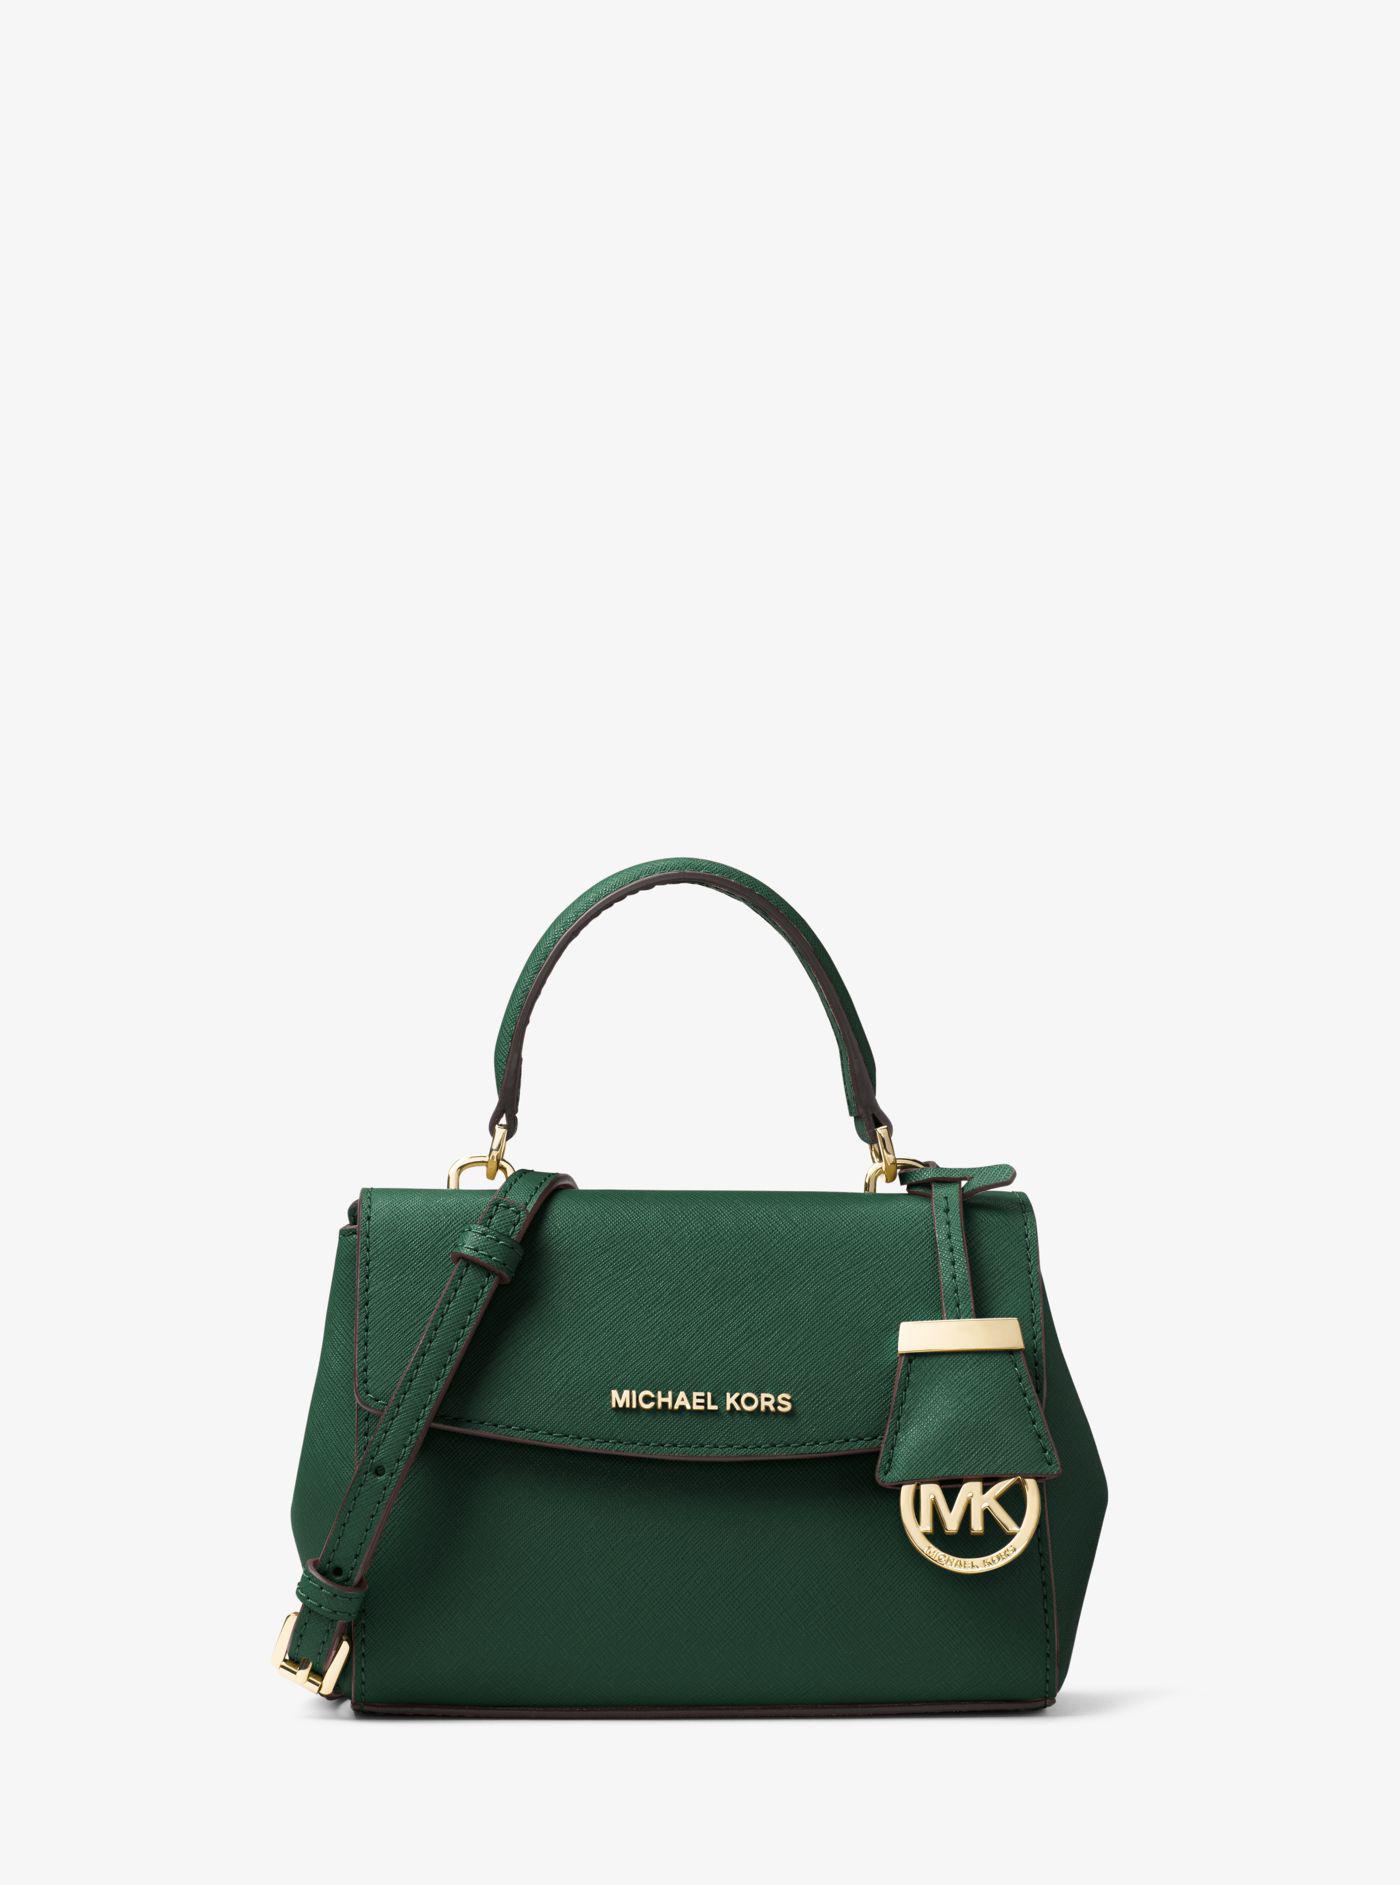 Michael Kors Ava Extra-small Saffiano Leather Cross-Body Bag in Moss  (Green) | Lyst